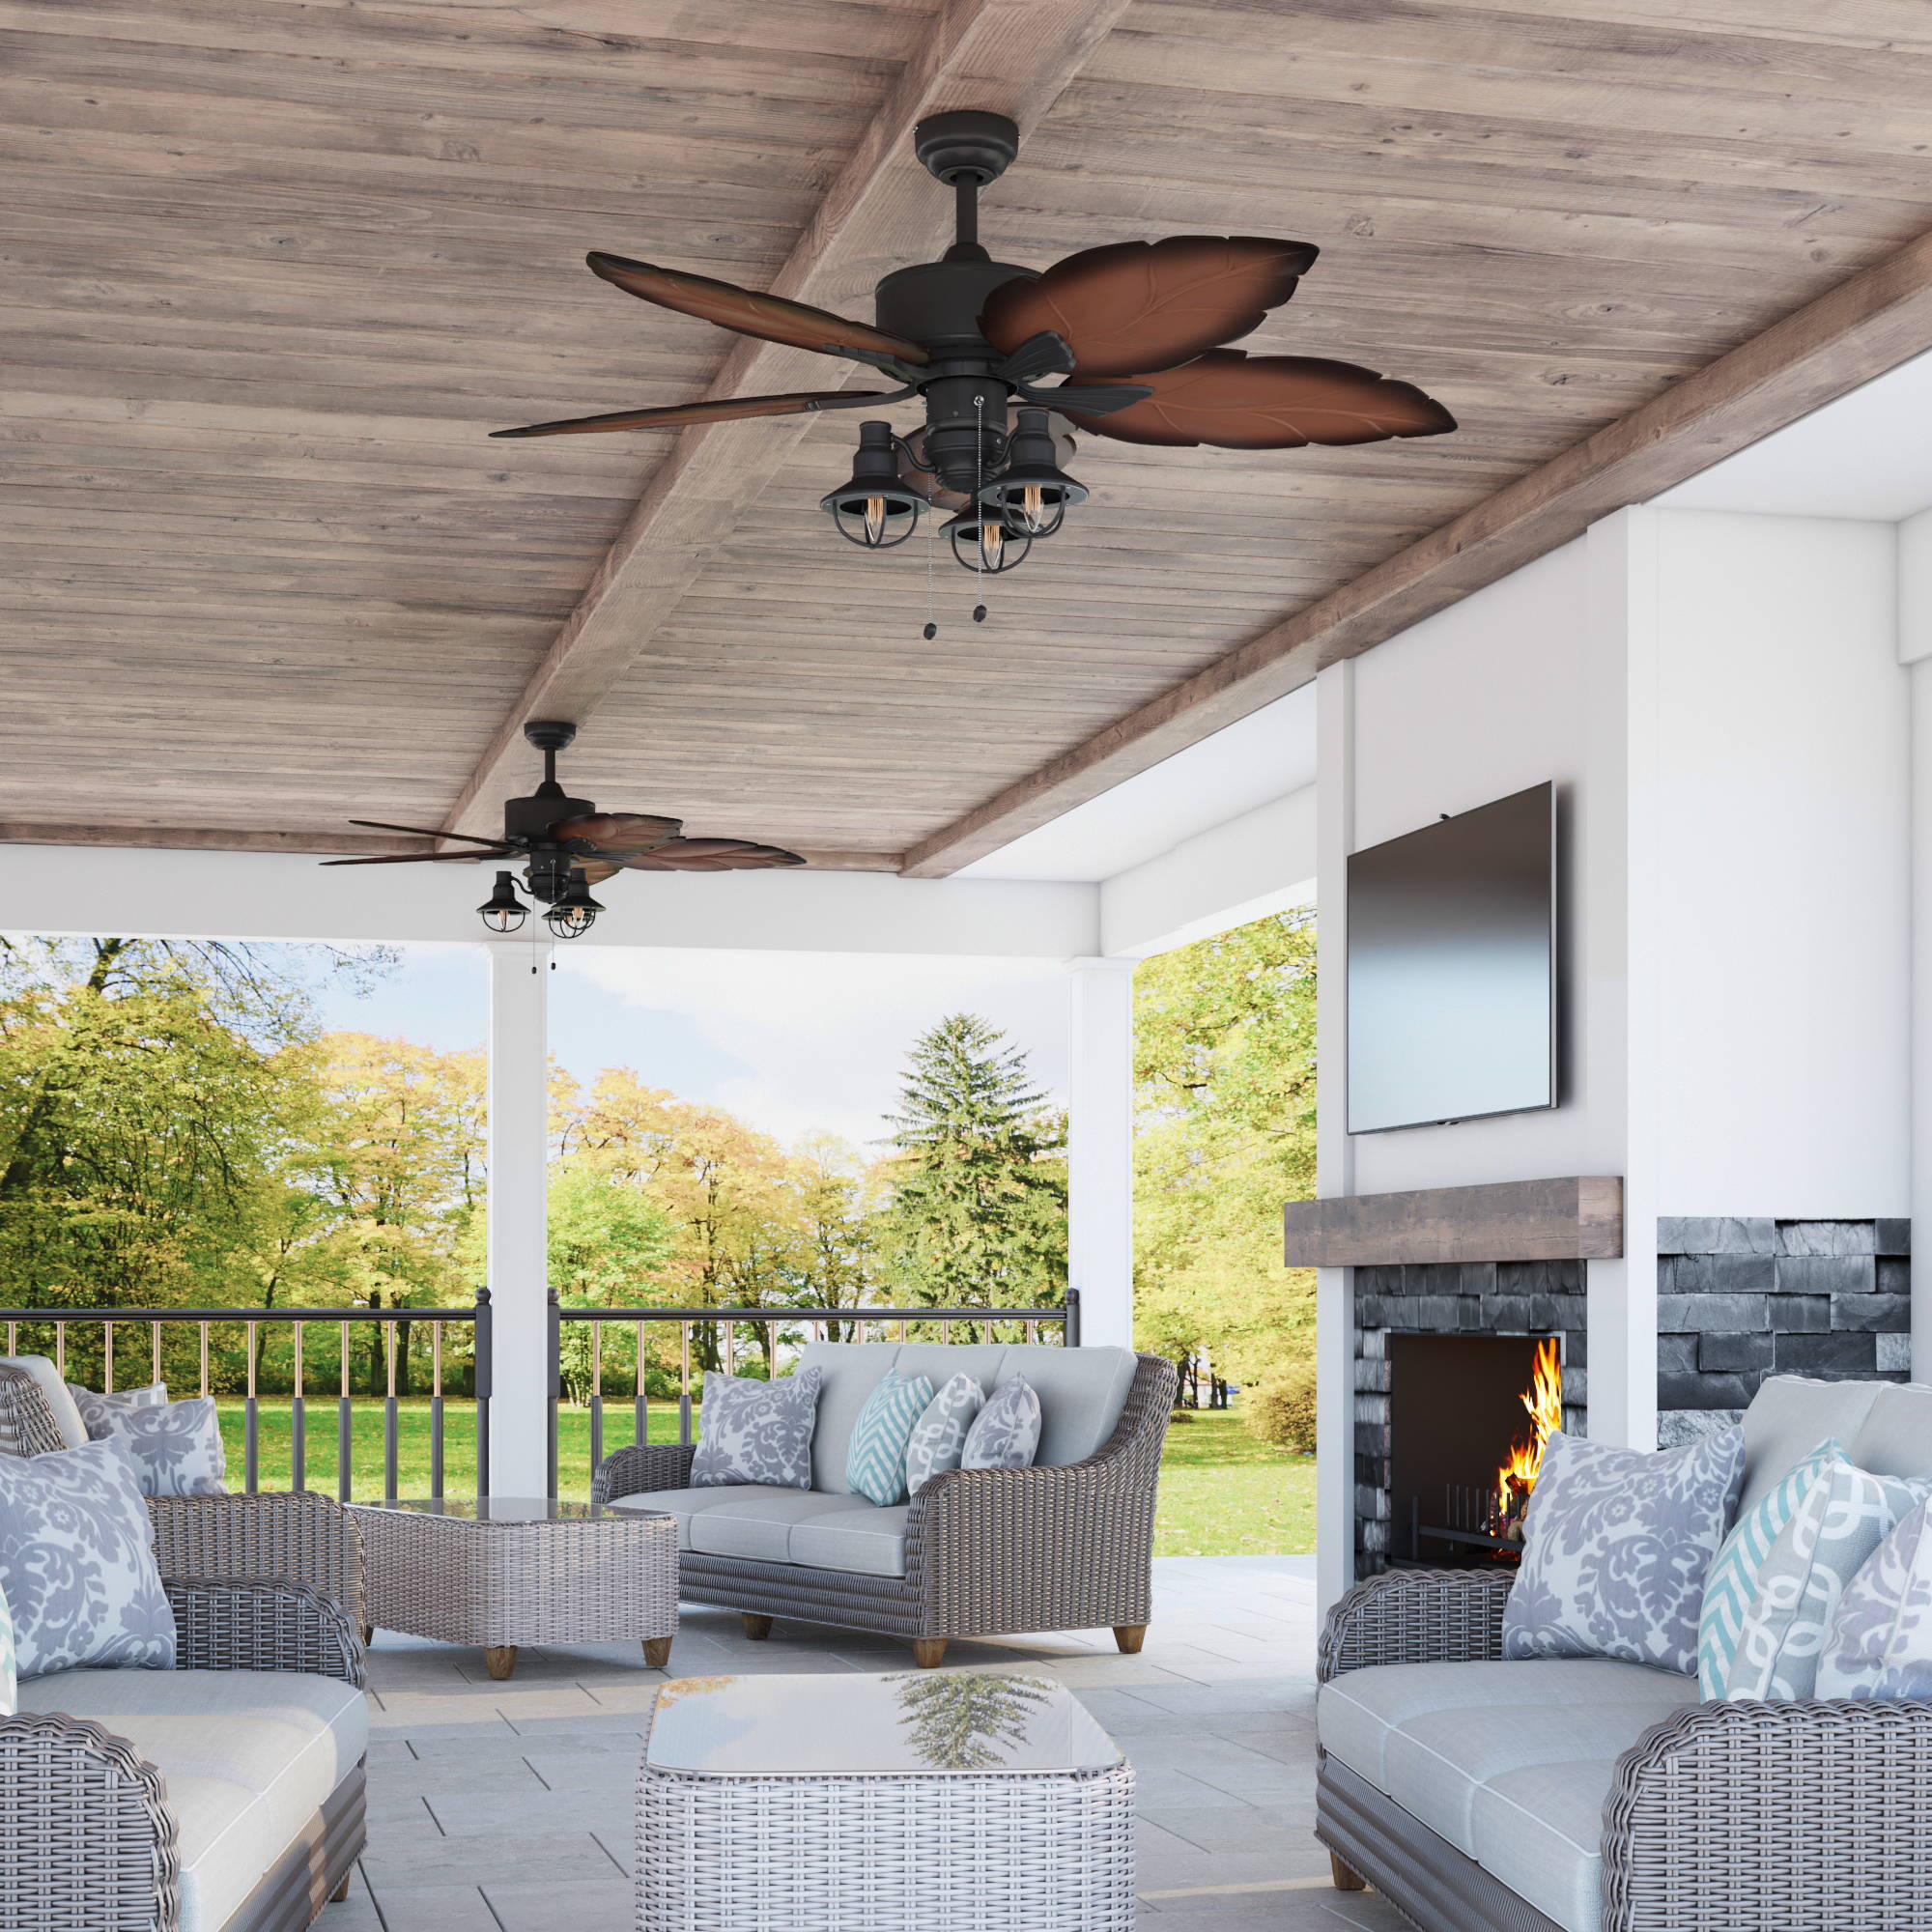 shop ceiling fans for your outdoor settings, decks, pergolas, patios and more. 